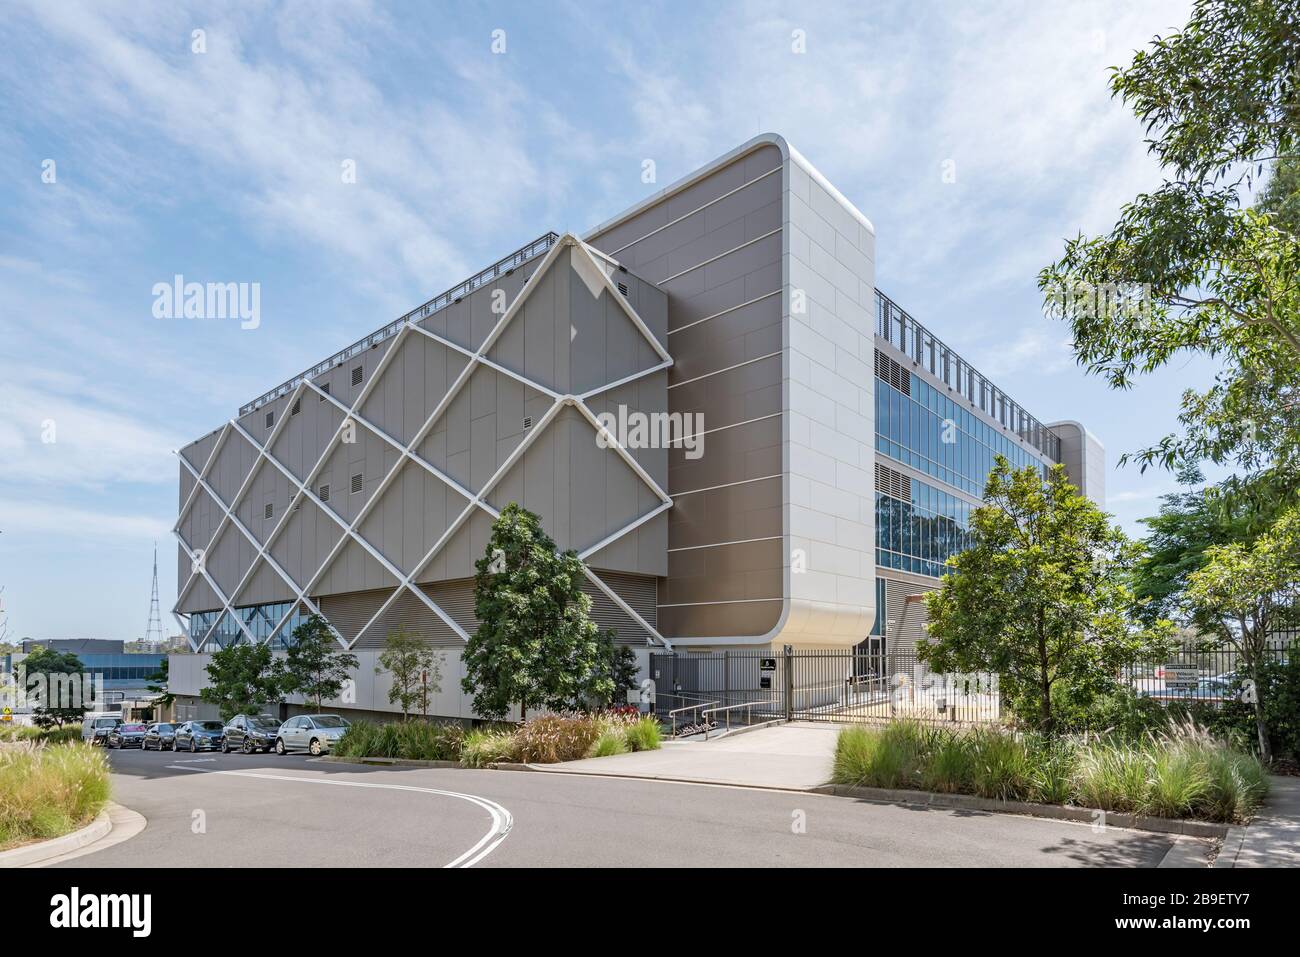 The production facility building for Australia's Foxtel Sports broadcast in the Sydney suburb of Artarmon, New South Wales, Australia Stock Photo